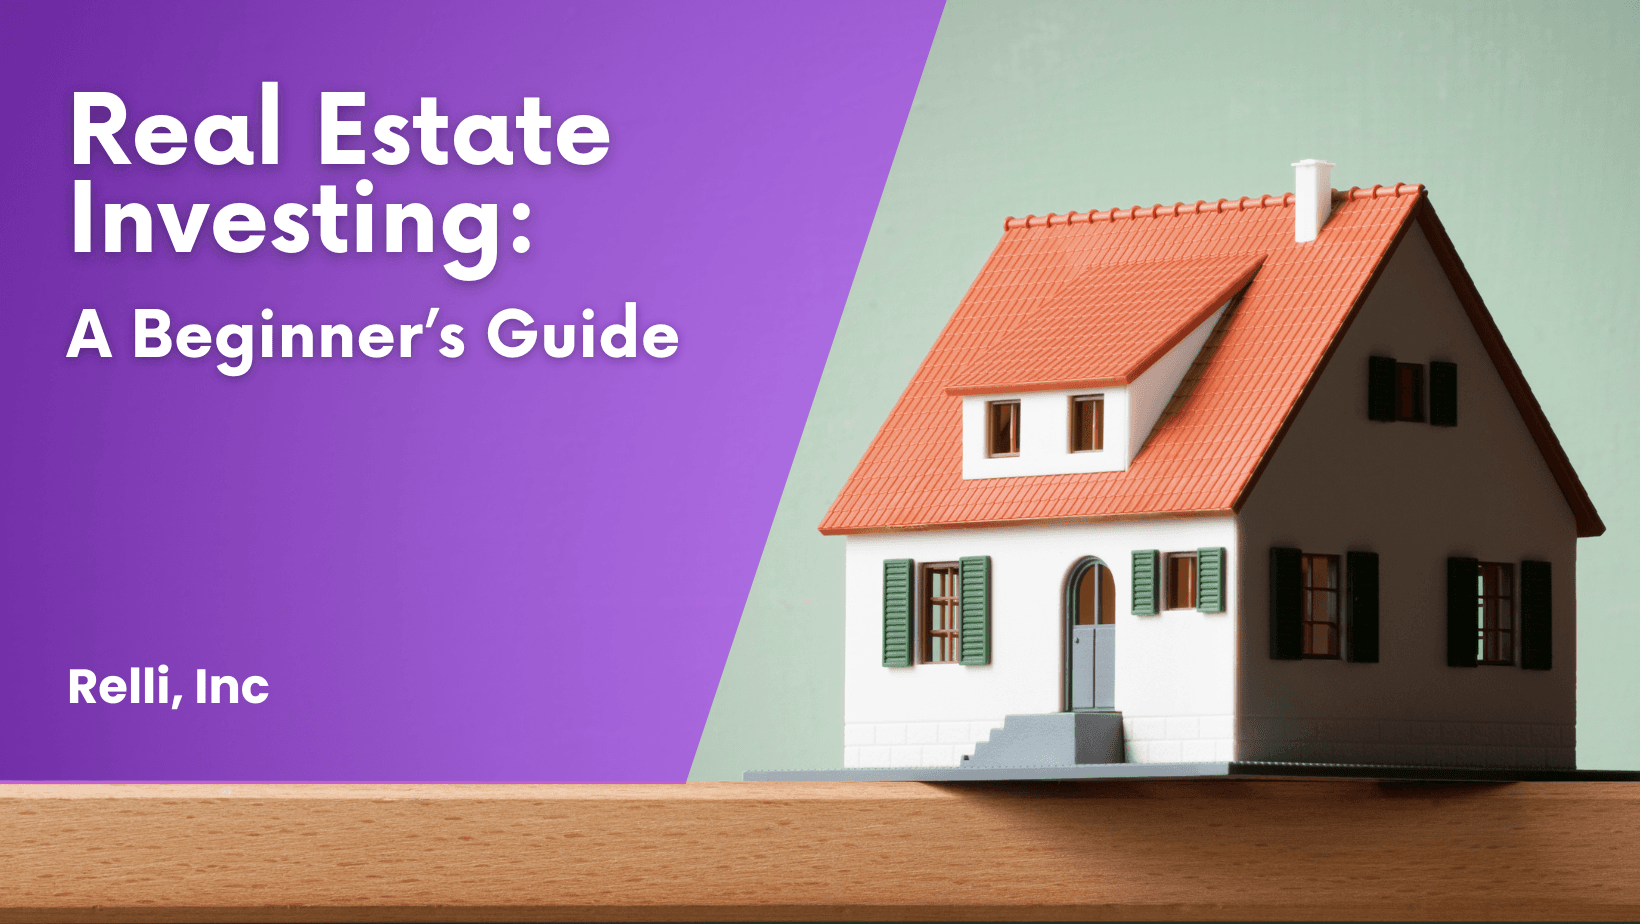 A Beginner's Guide To Real Estate Investing